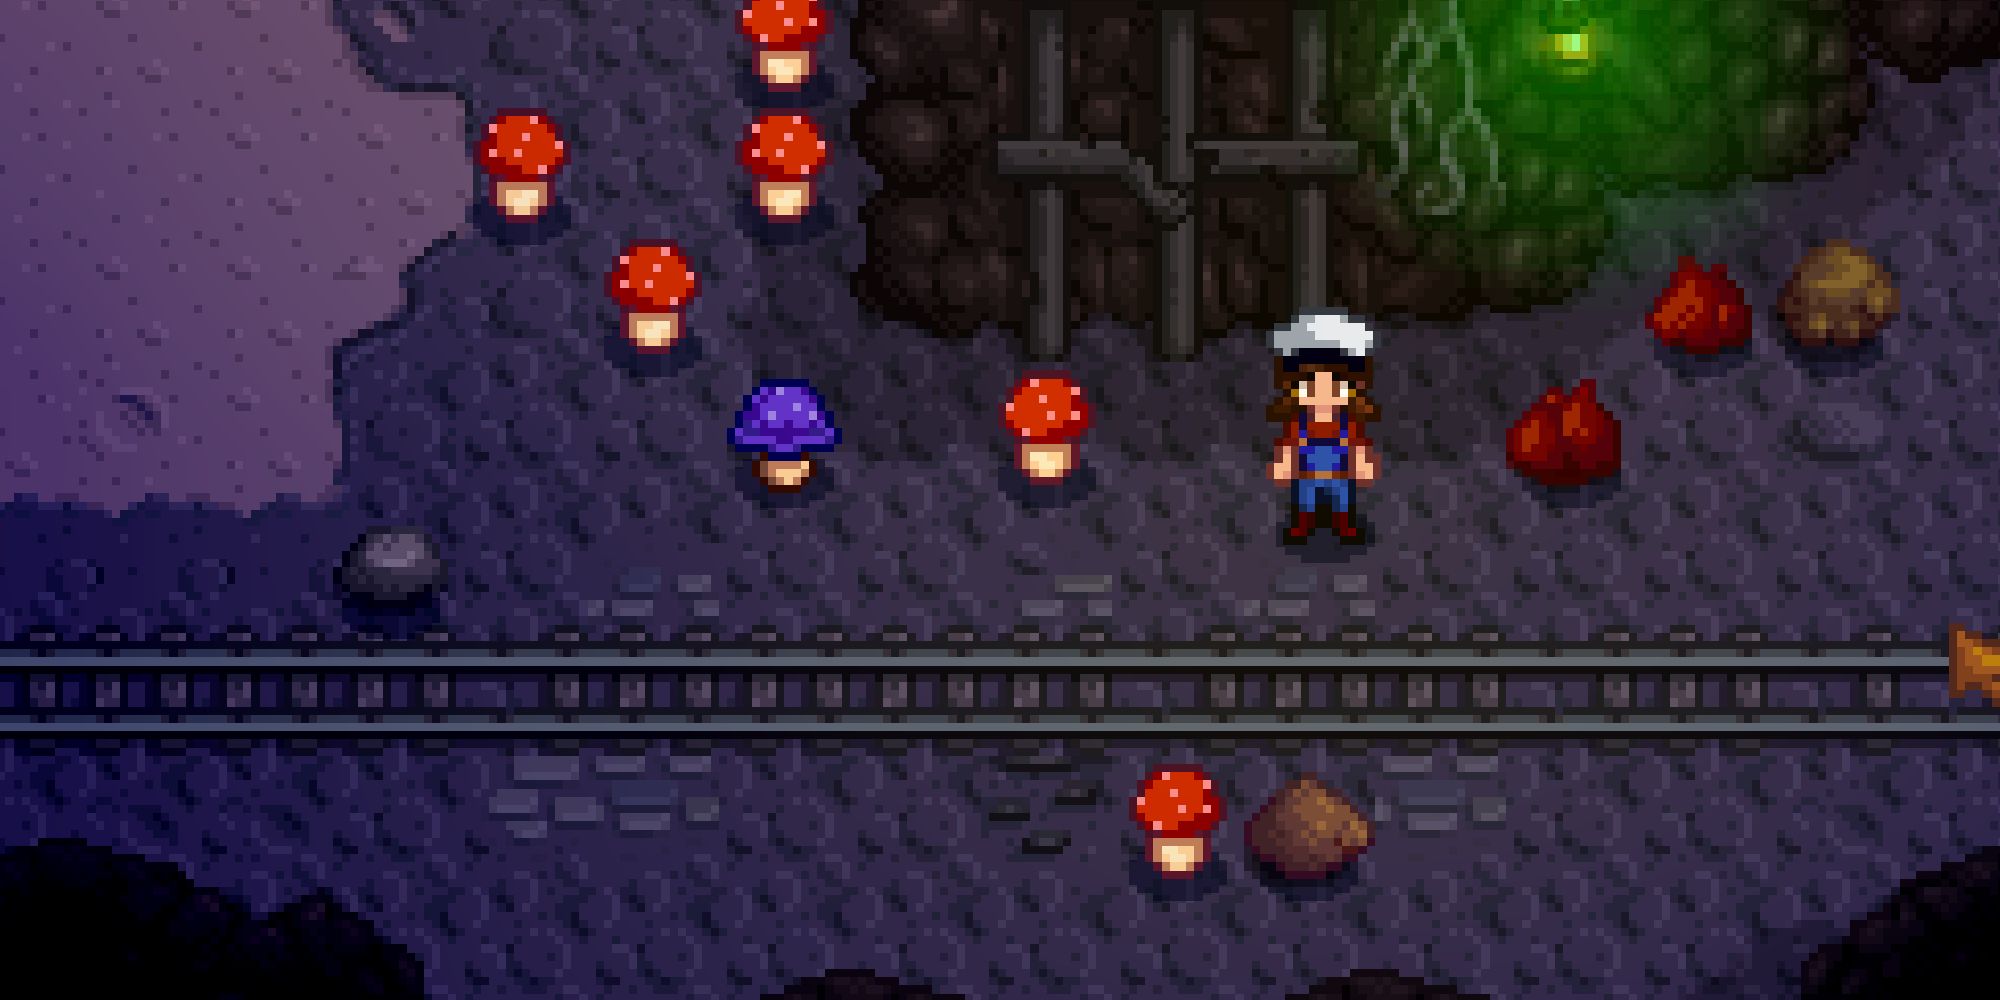 stardew valley player standing near red and purple mushrooms